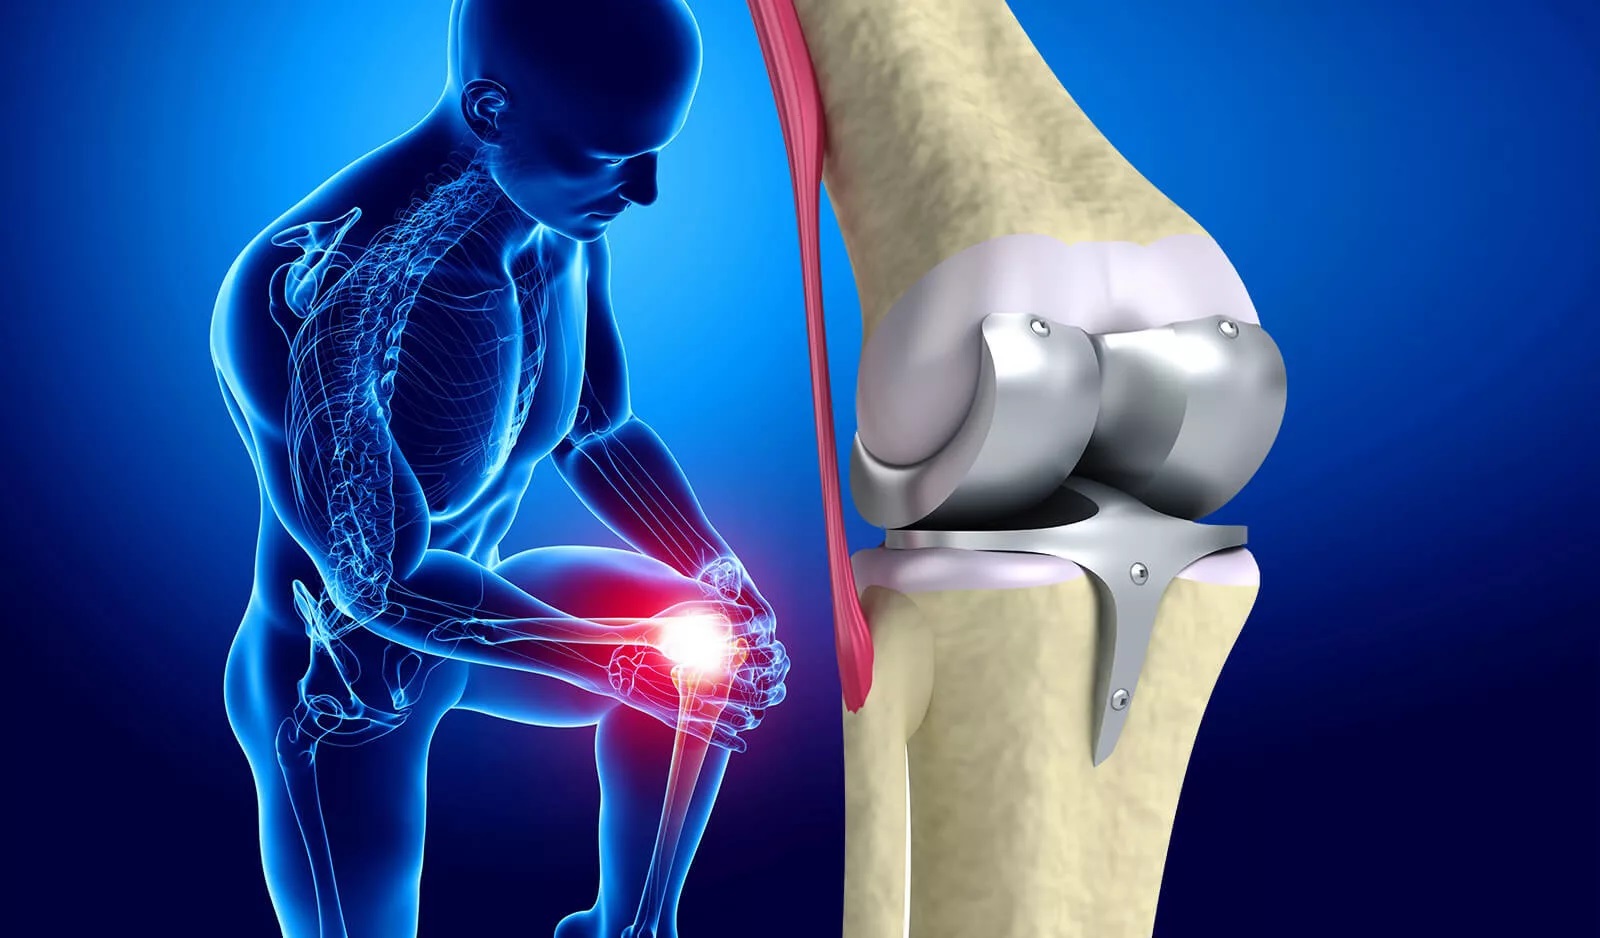 What is Unicondylar Knee Prosthesis?